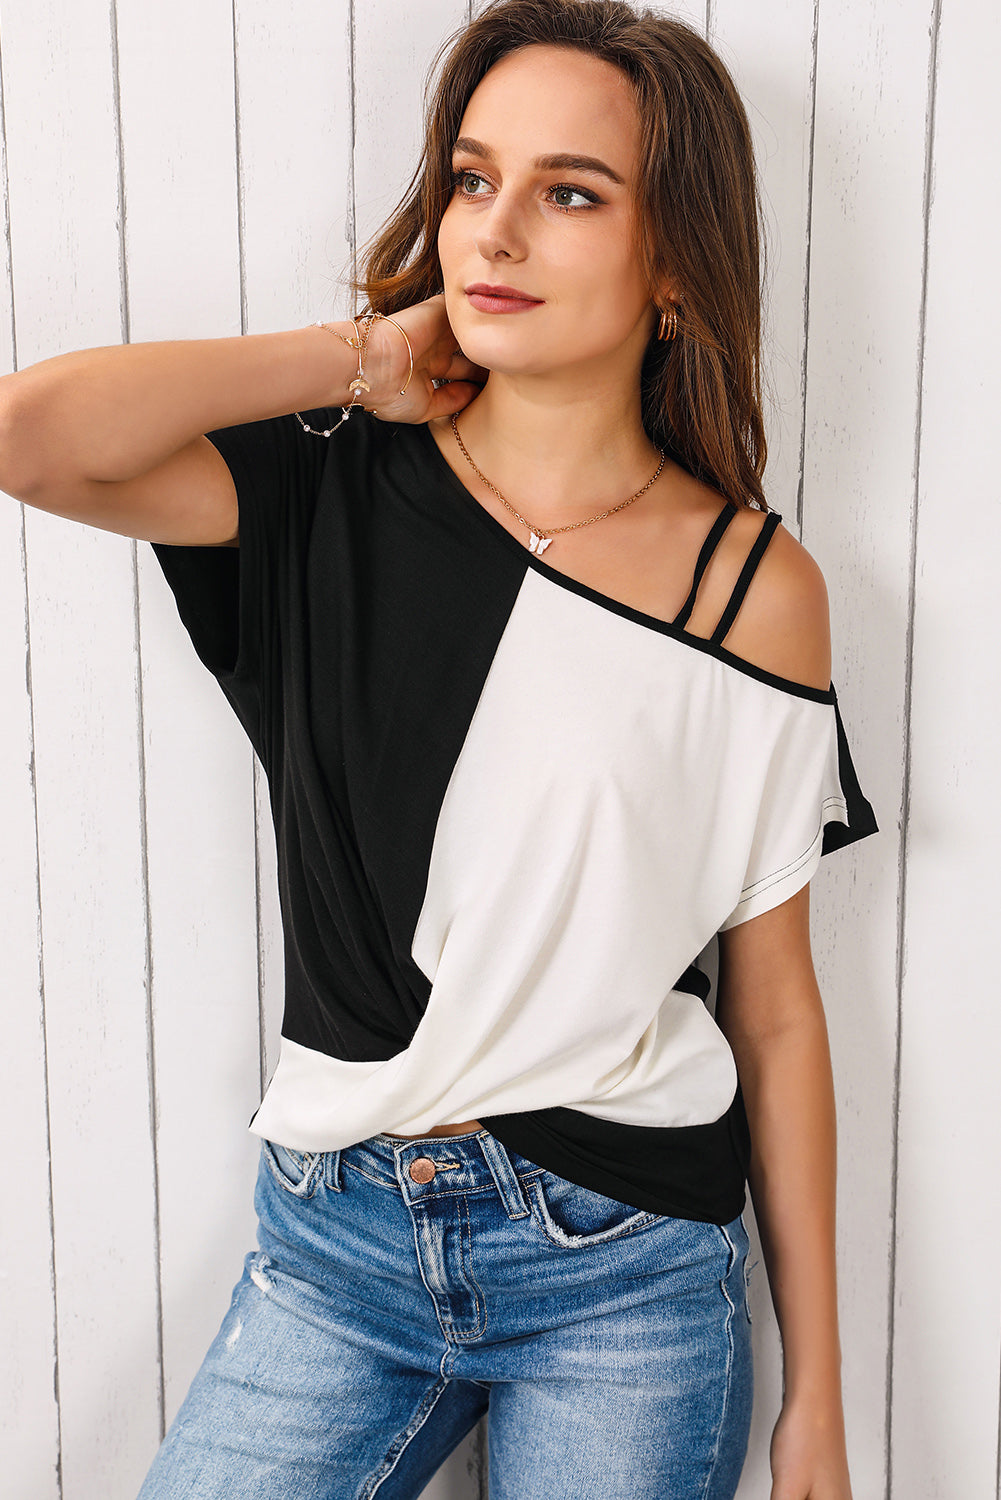 Contrast Twisted Asymmetrical Neck Top - Black / S - Women’s Clothing & Accessories - Shirts & Tops - 1 - 2024